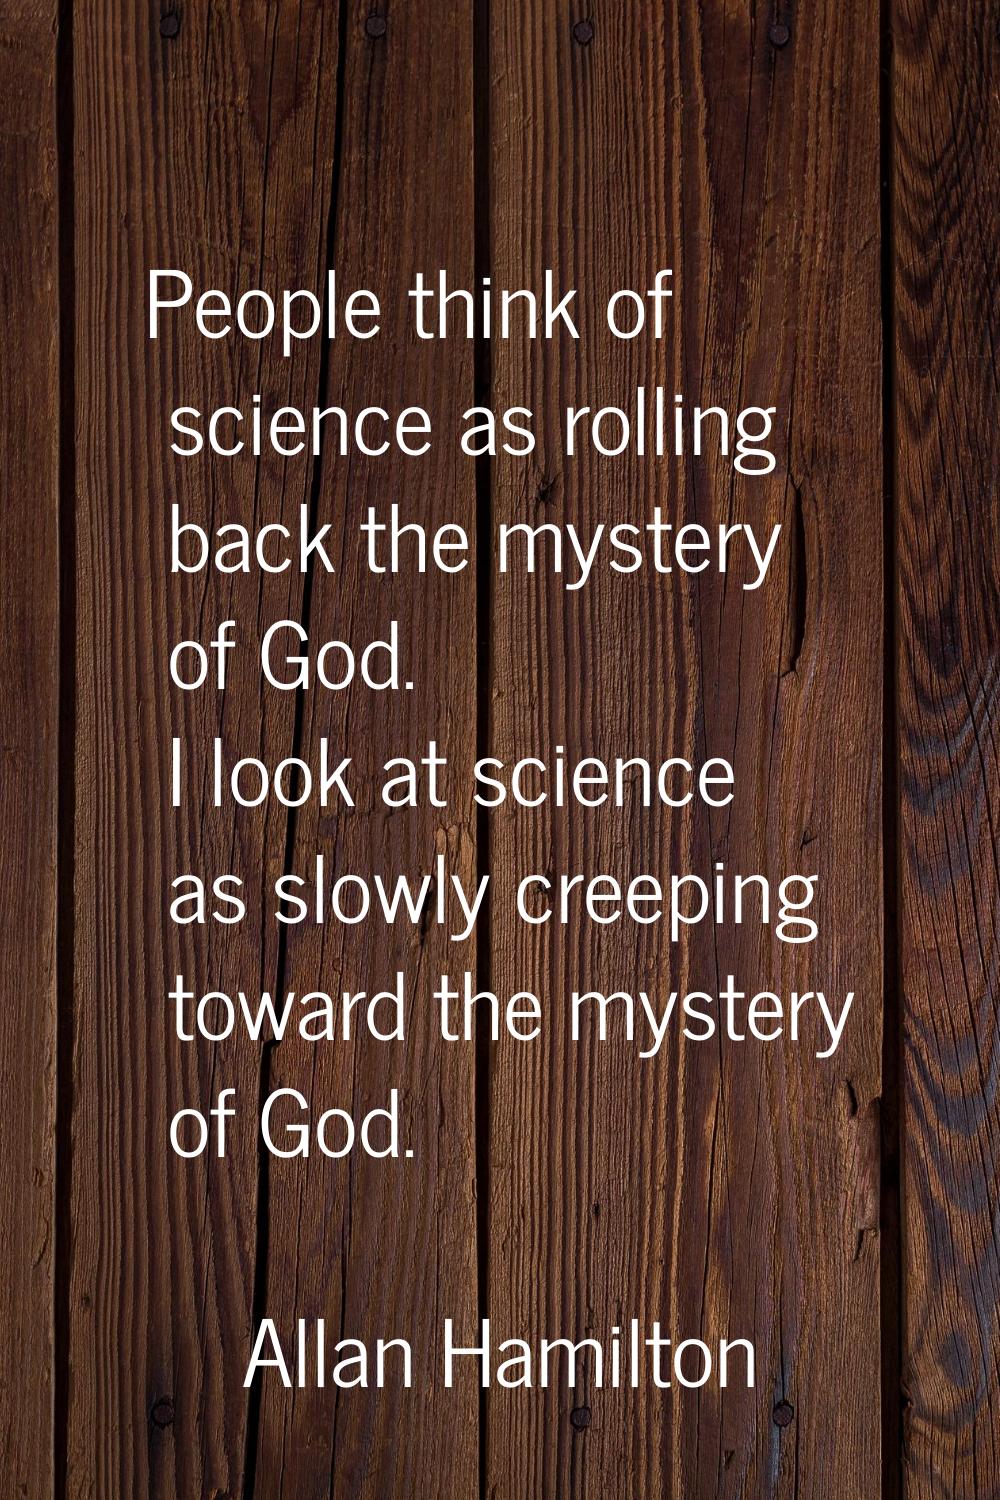 People think of science as rolling back the mystery of God. I look at science as slowly creeping to